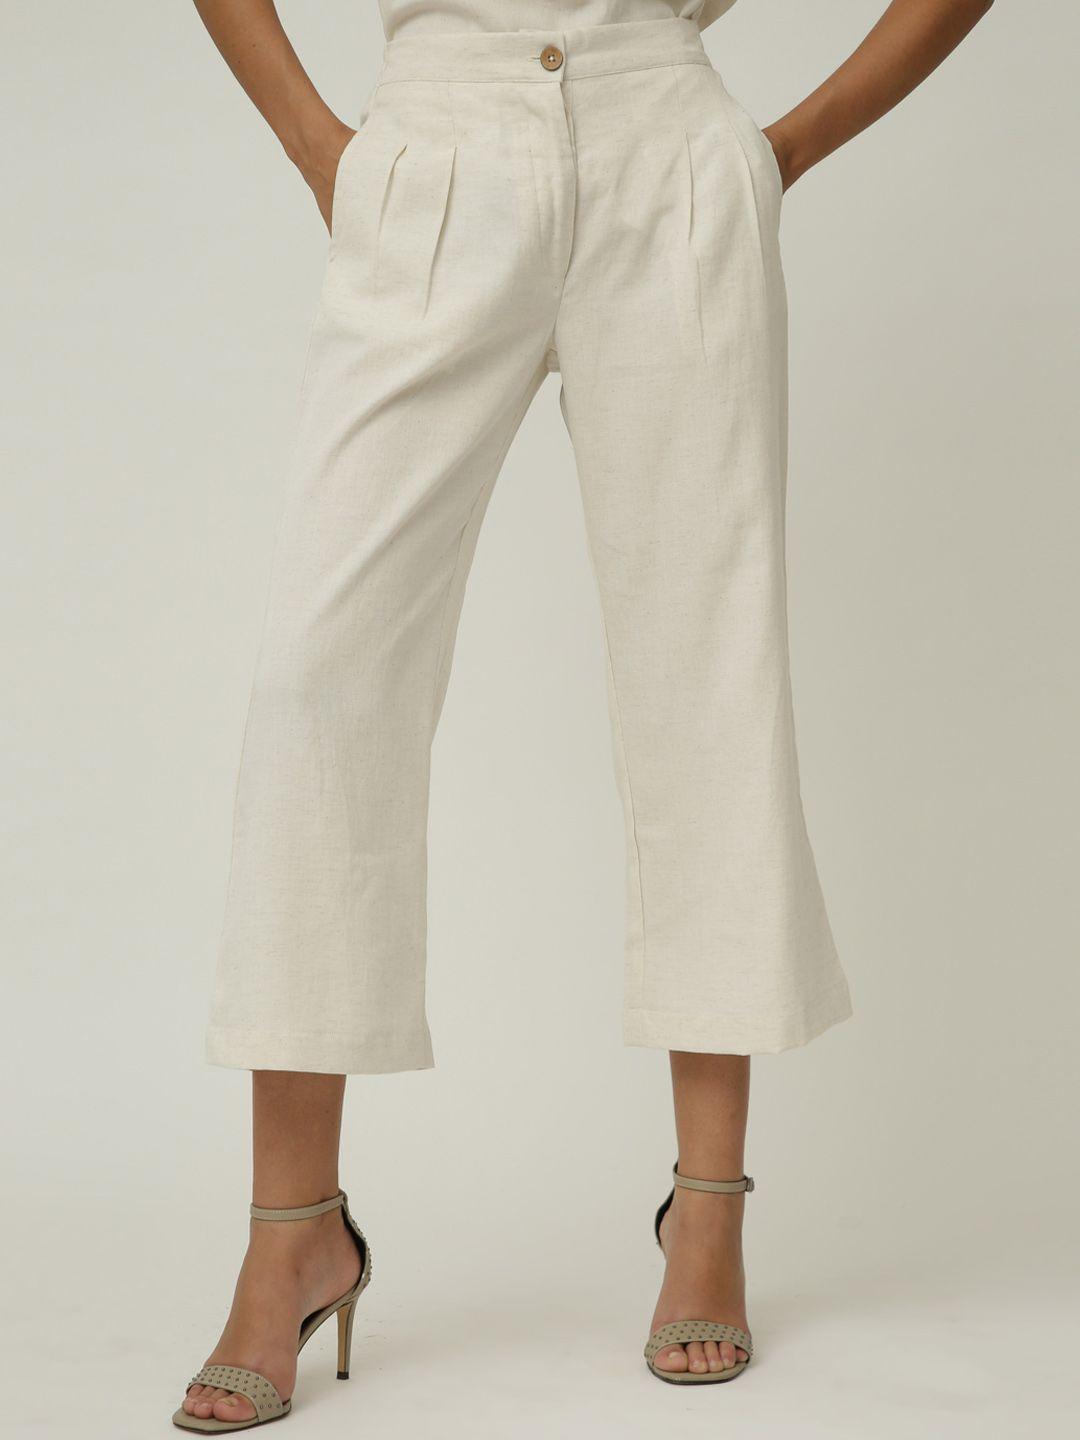 saltpetre linen tunic with trousers co-ords